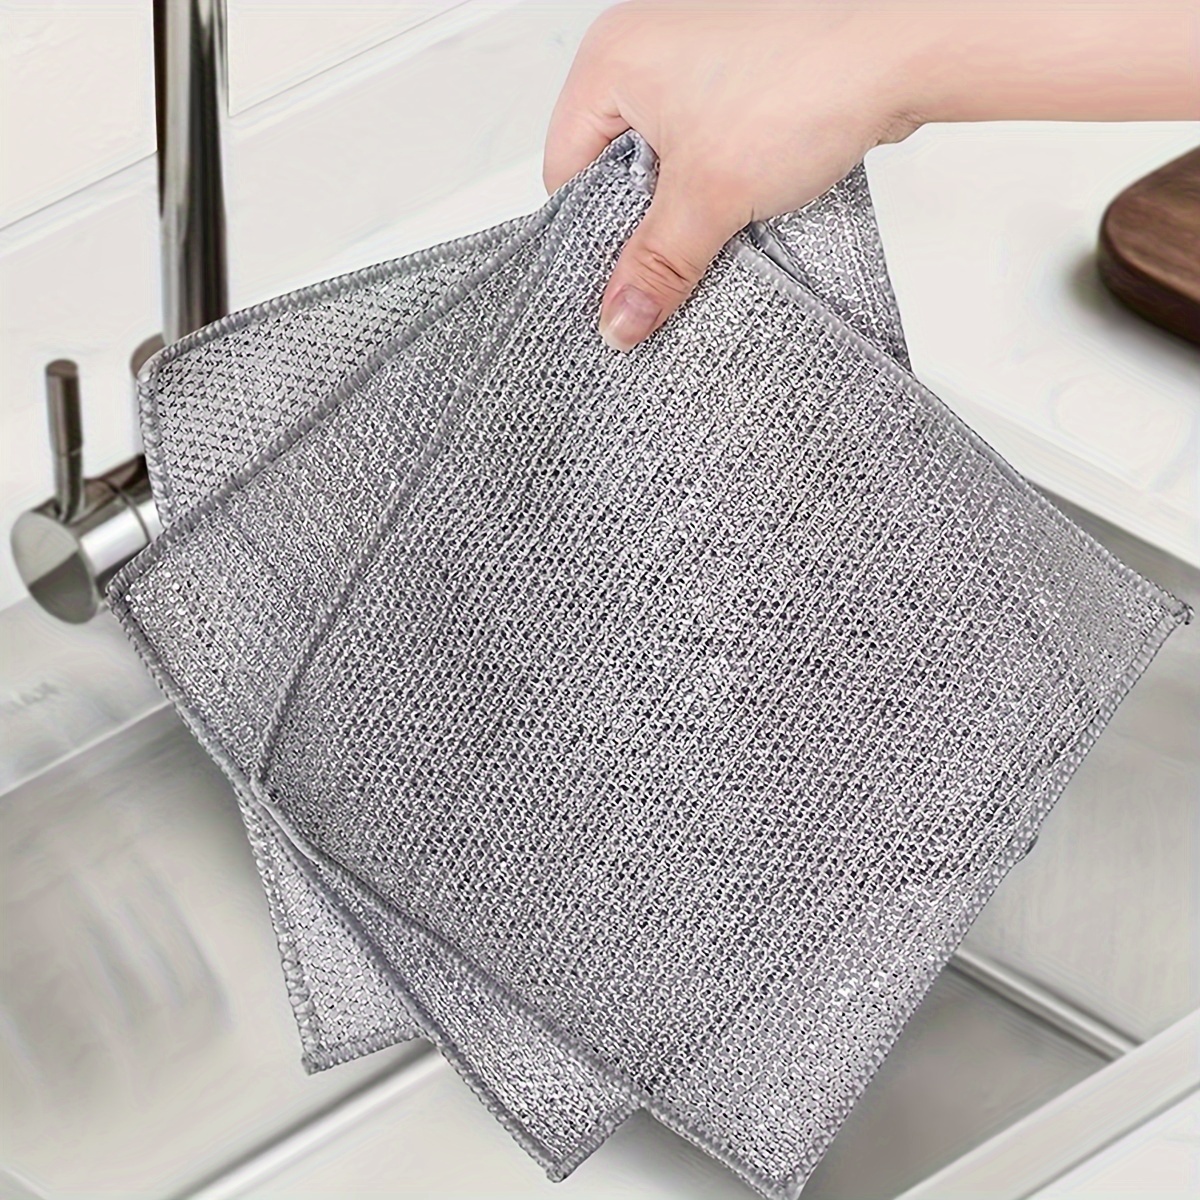 New Steel Wire Dishcloth Multifunctional Double -layer Dish Towel